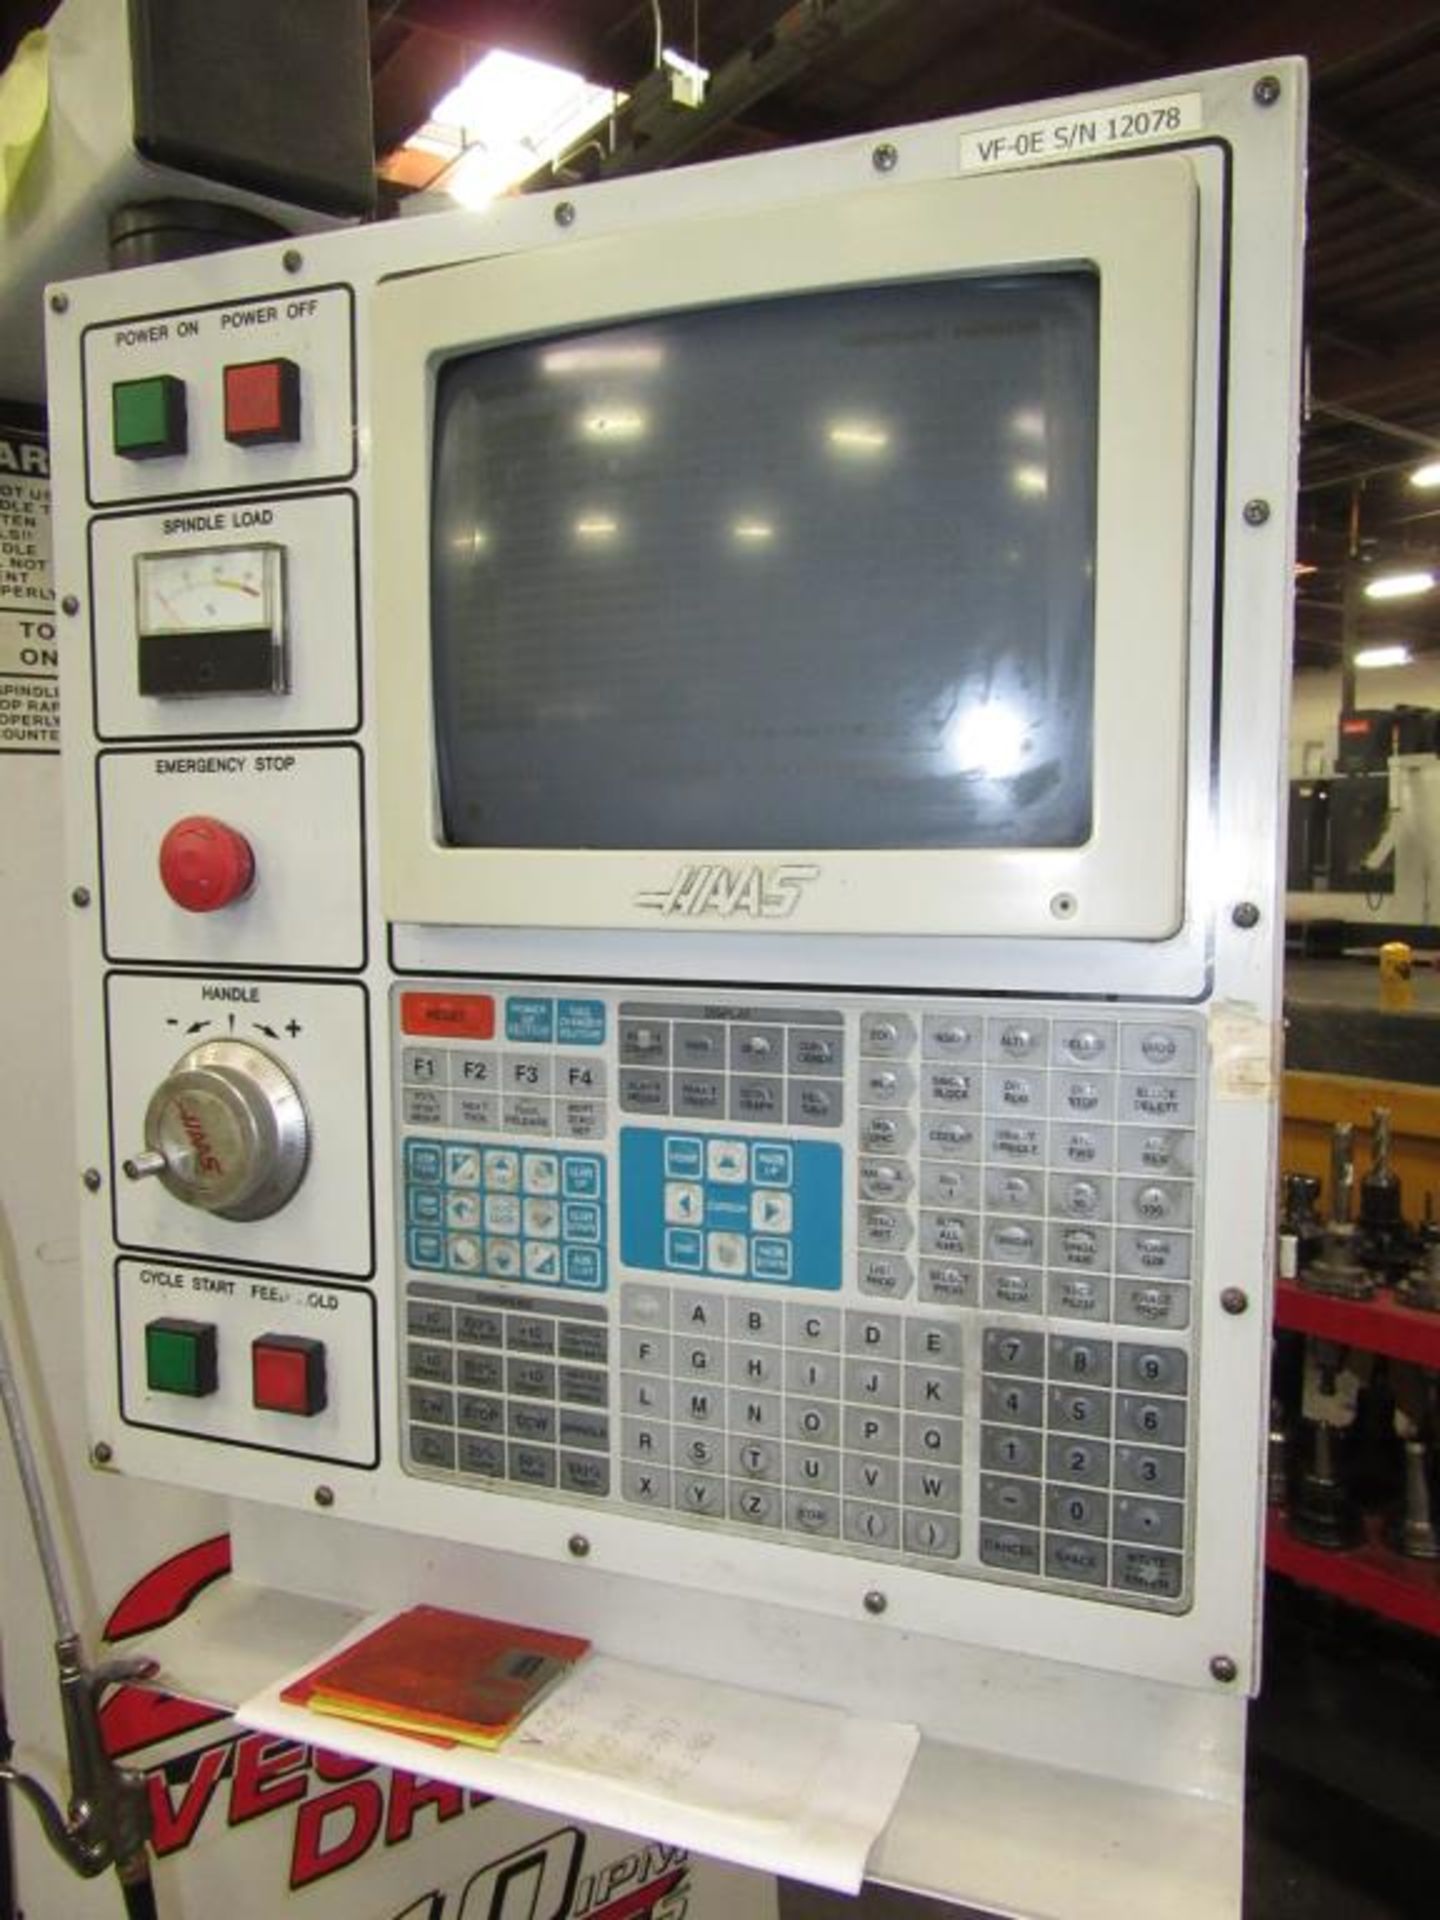 Haas VF-OE. 1997 - CNC Vertical Machining Center with Haas 3-Axis Control Panel, Table Size 36"L x - Image 3 of 12